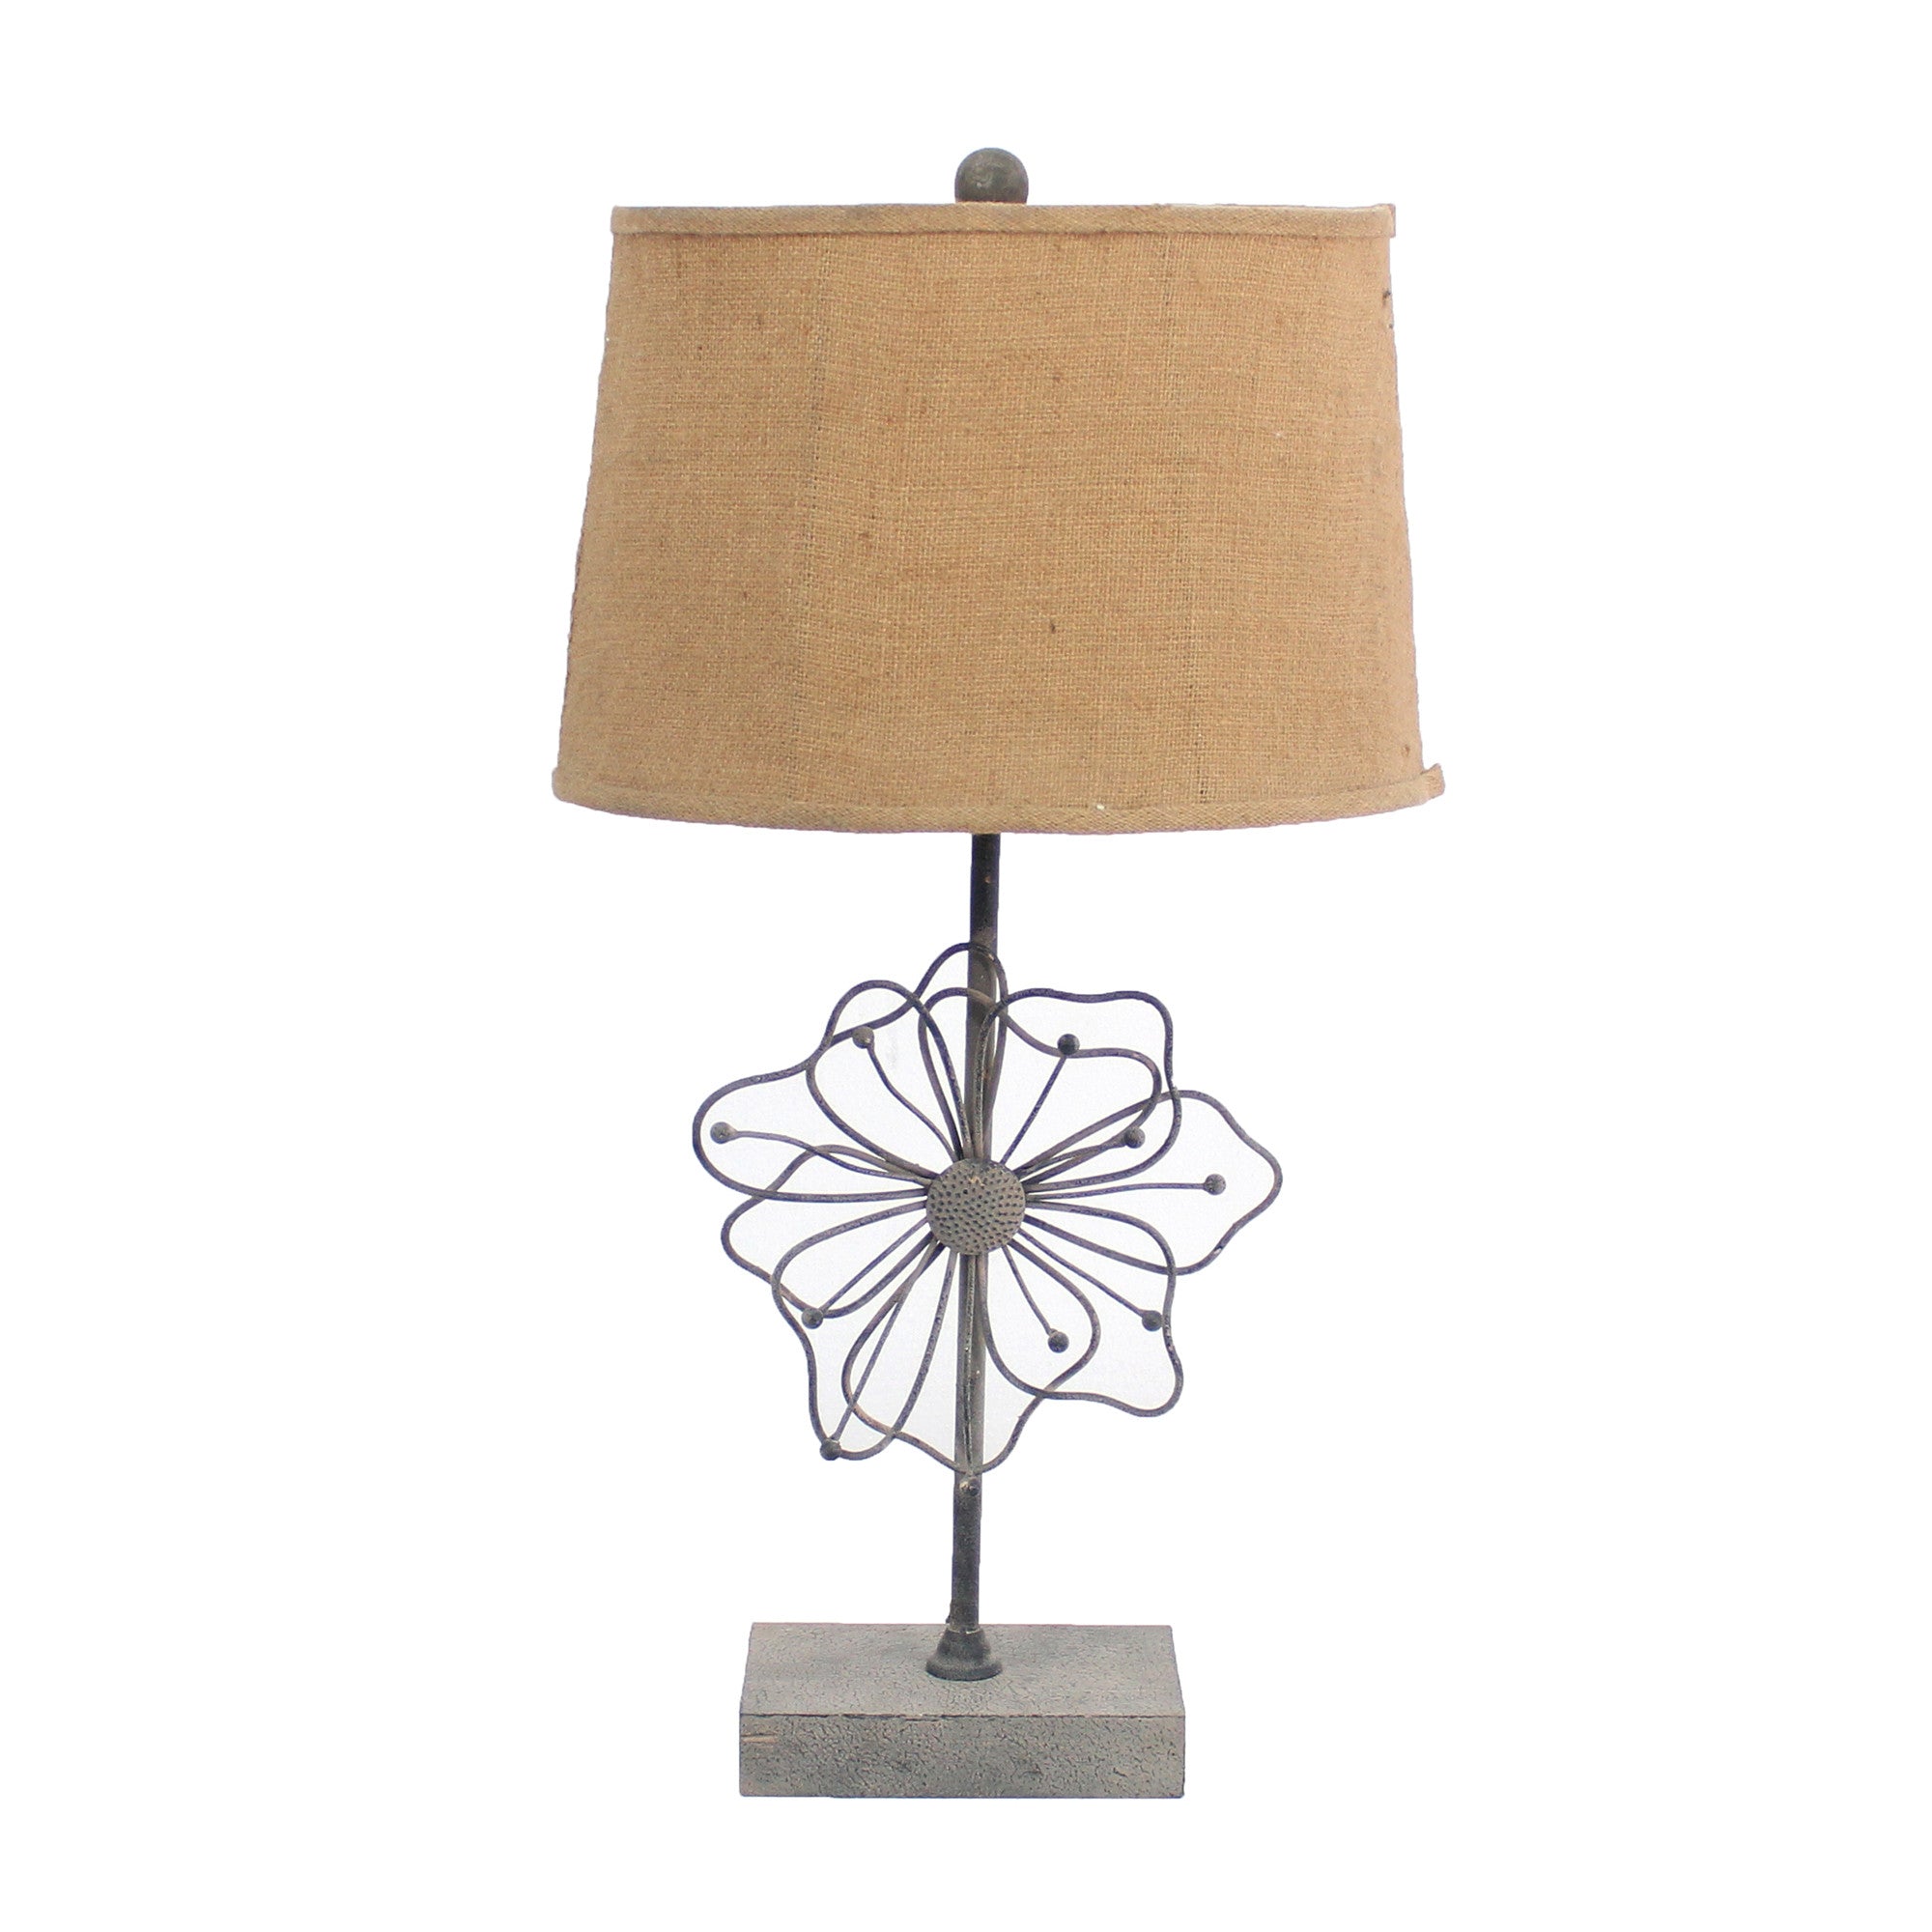 11 X 15 X 27.75 Tan Country Cottage With Blooming Flower Pedestal - Table Lamp - Tuesday Morning-Table Lamps